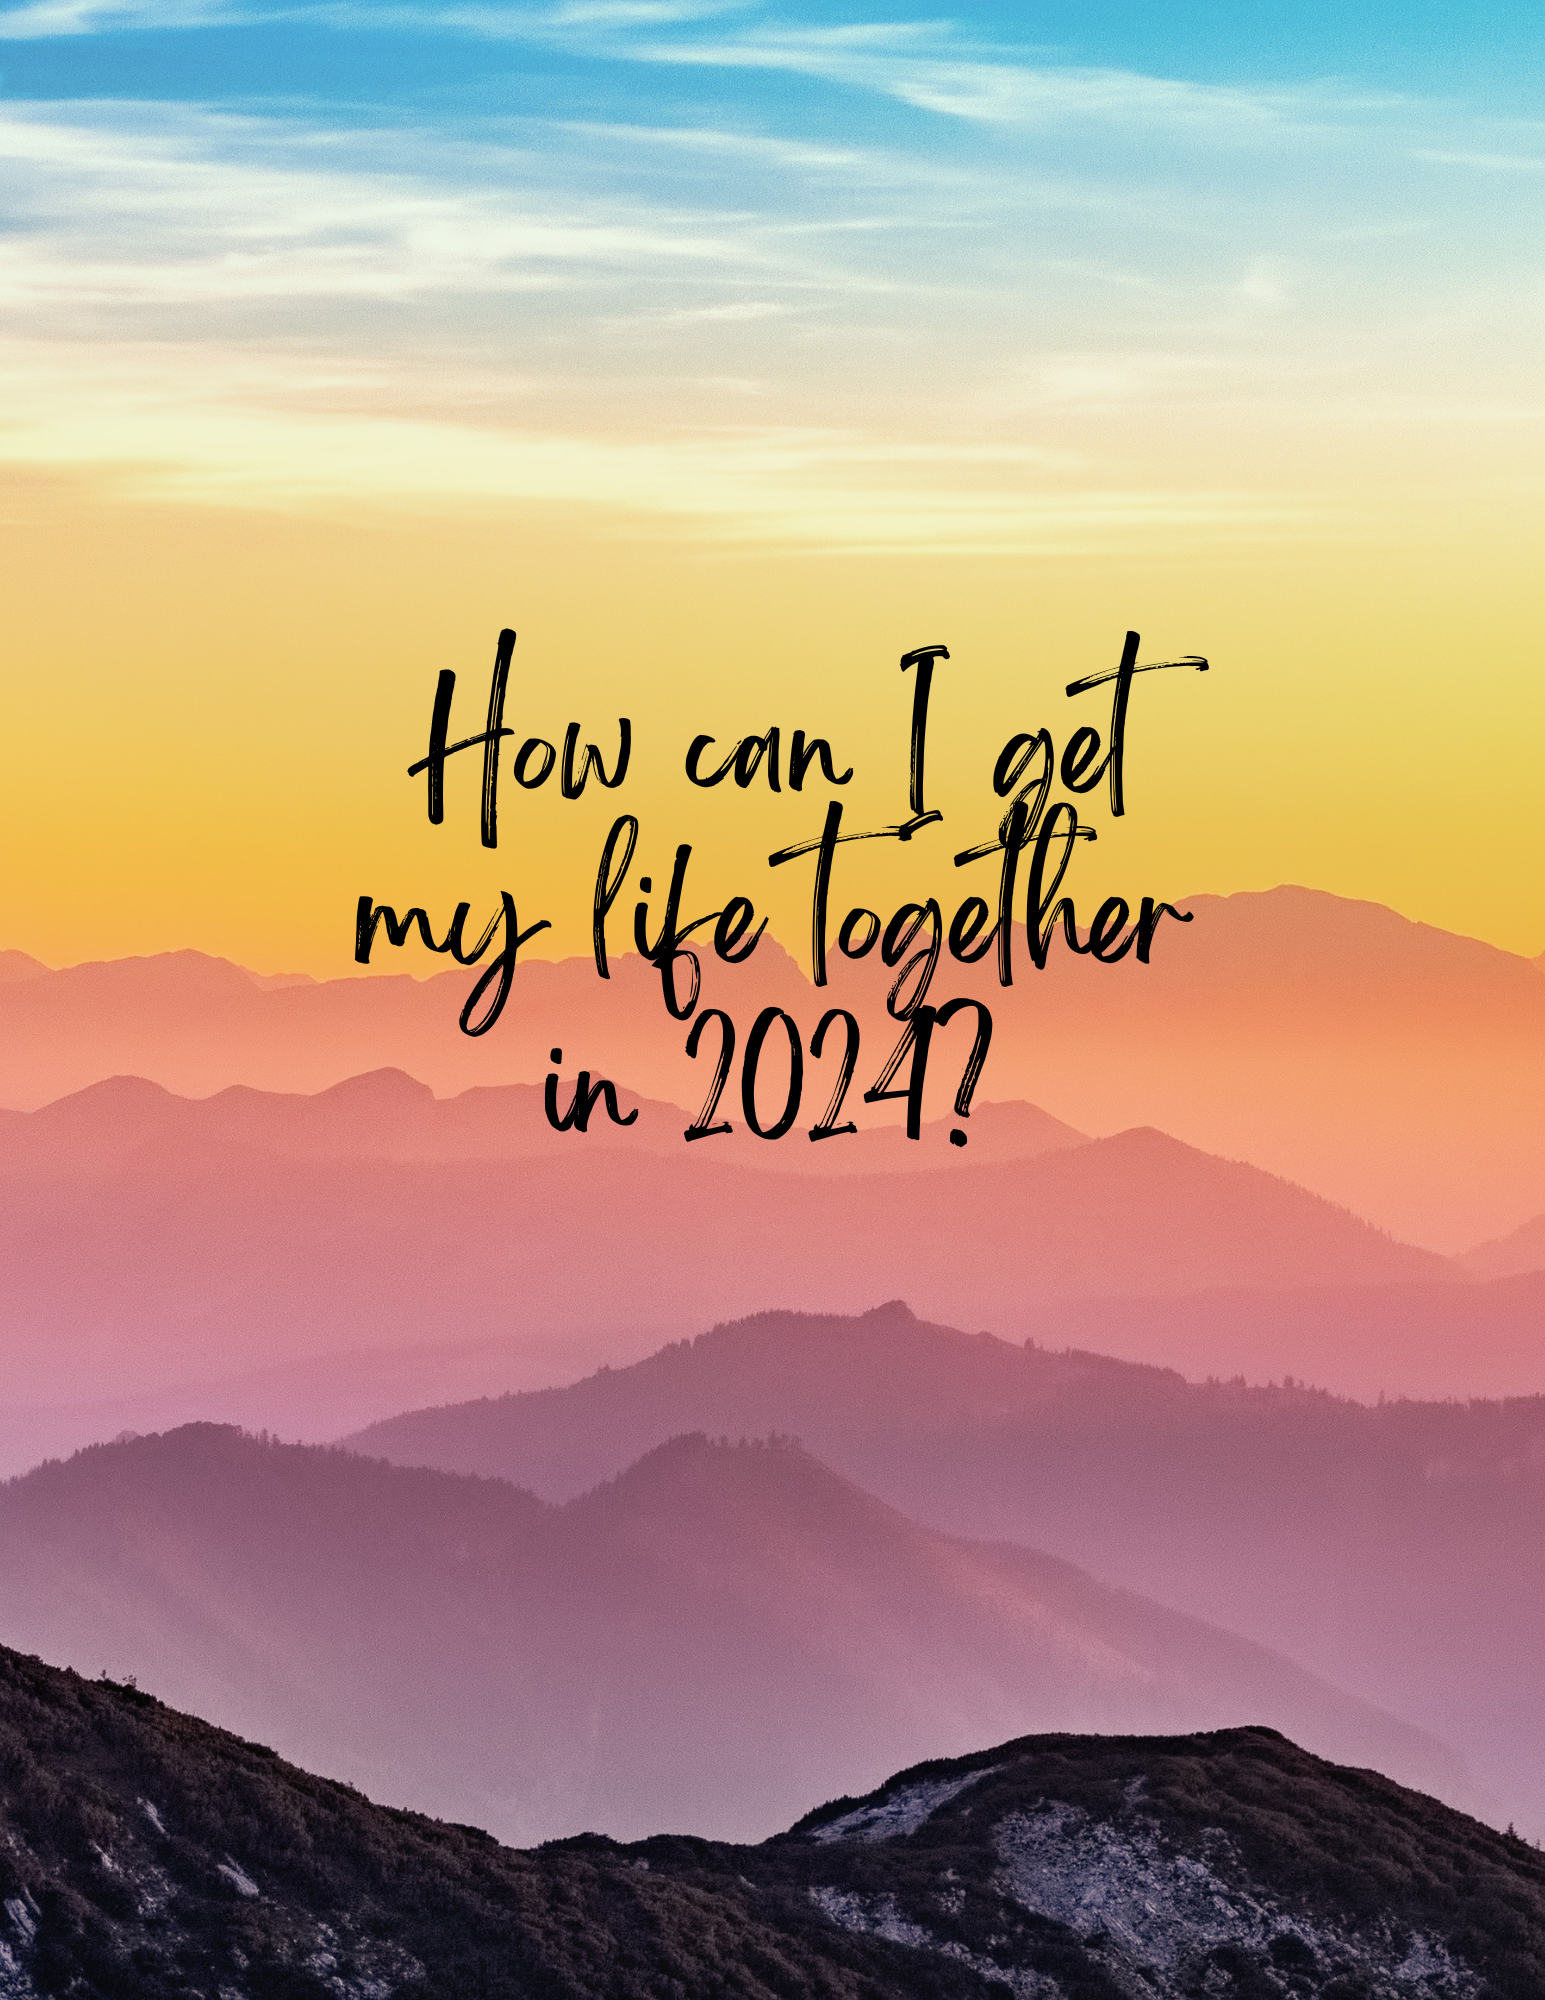 How can I get my life together in 2024?